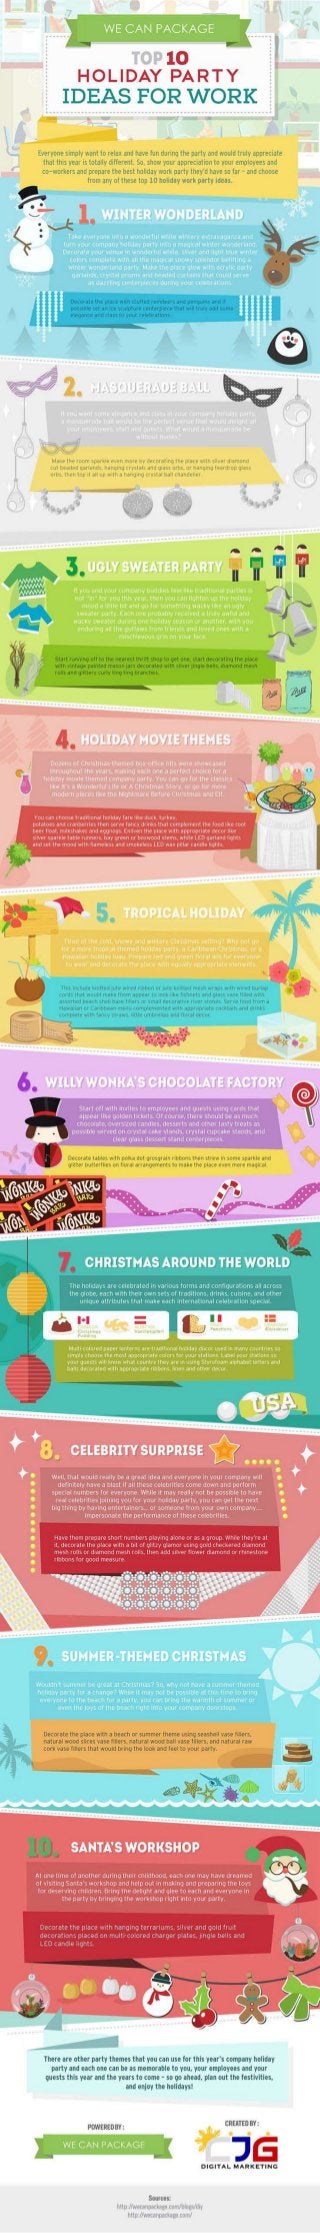 Top 10 Holiday Party Ideas for Work (Infographic)